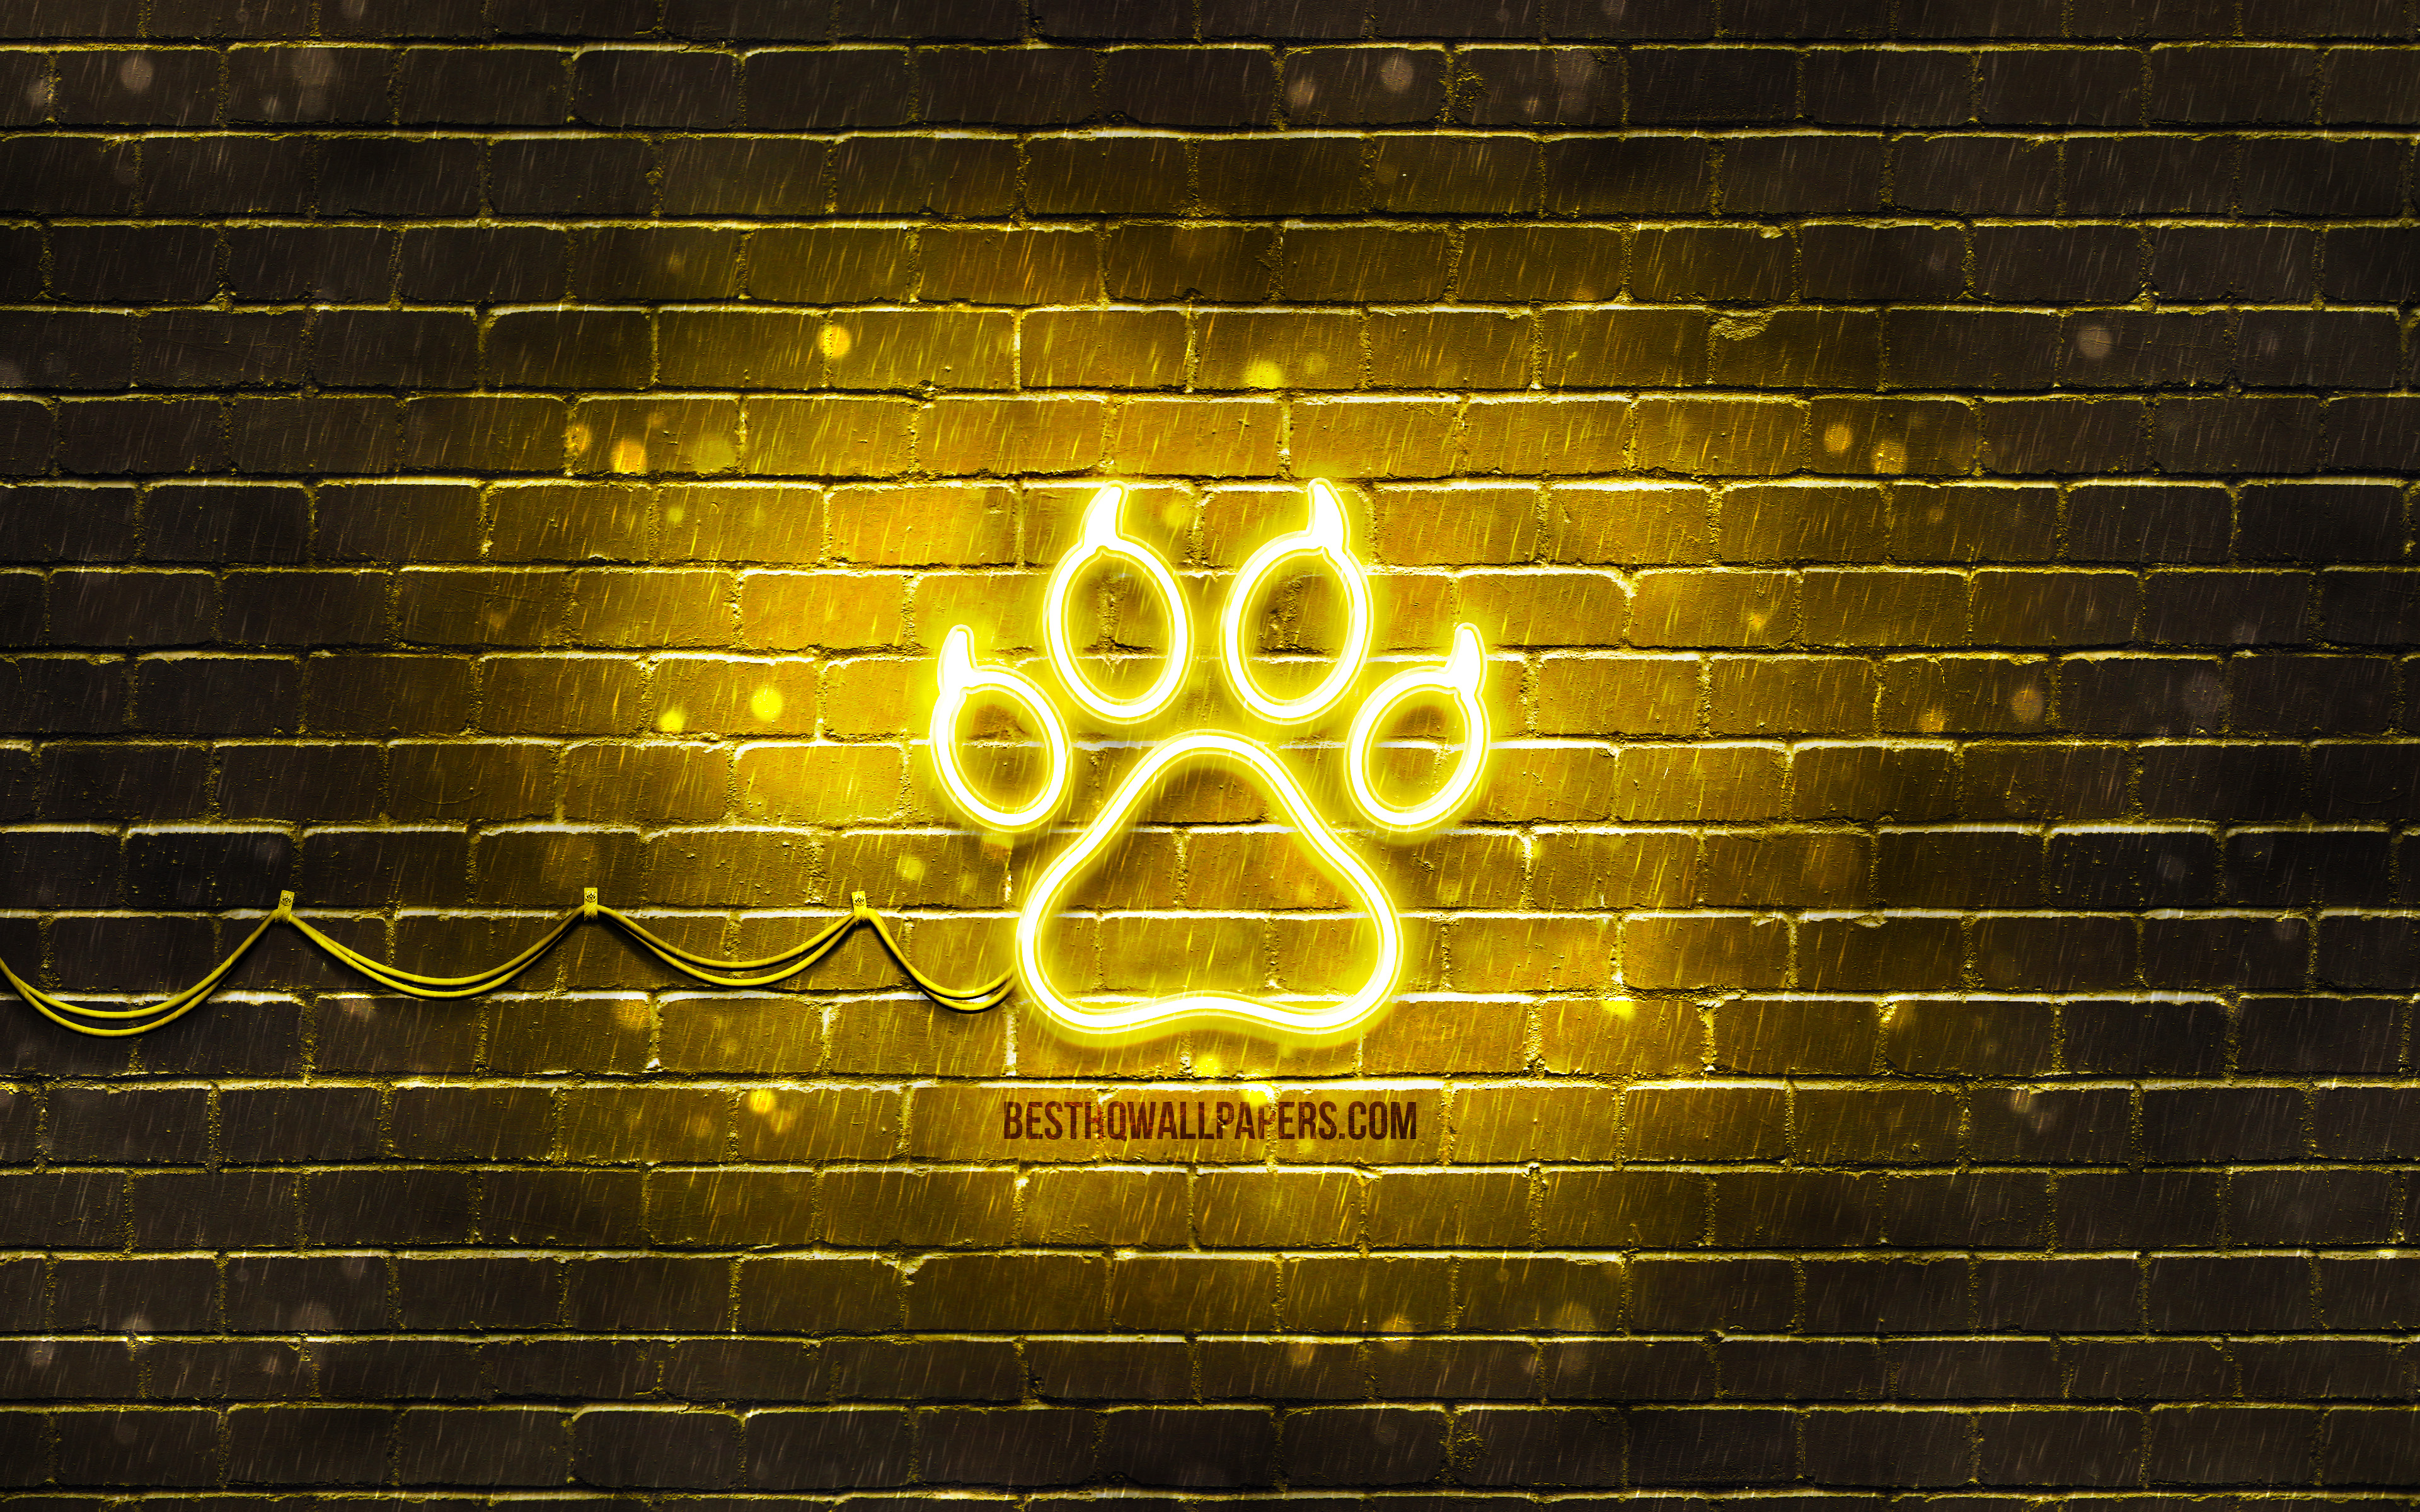 Download wallpaper Cat paw neon icon, 4k, yellow background, neon symbols, Cat paw, creative, neon icons, Cat paw sign, animals signs, Cat paw icon, animals icons for desktop with resolution 3840x2400. High